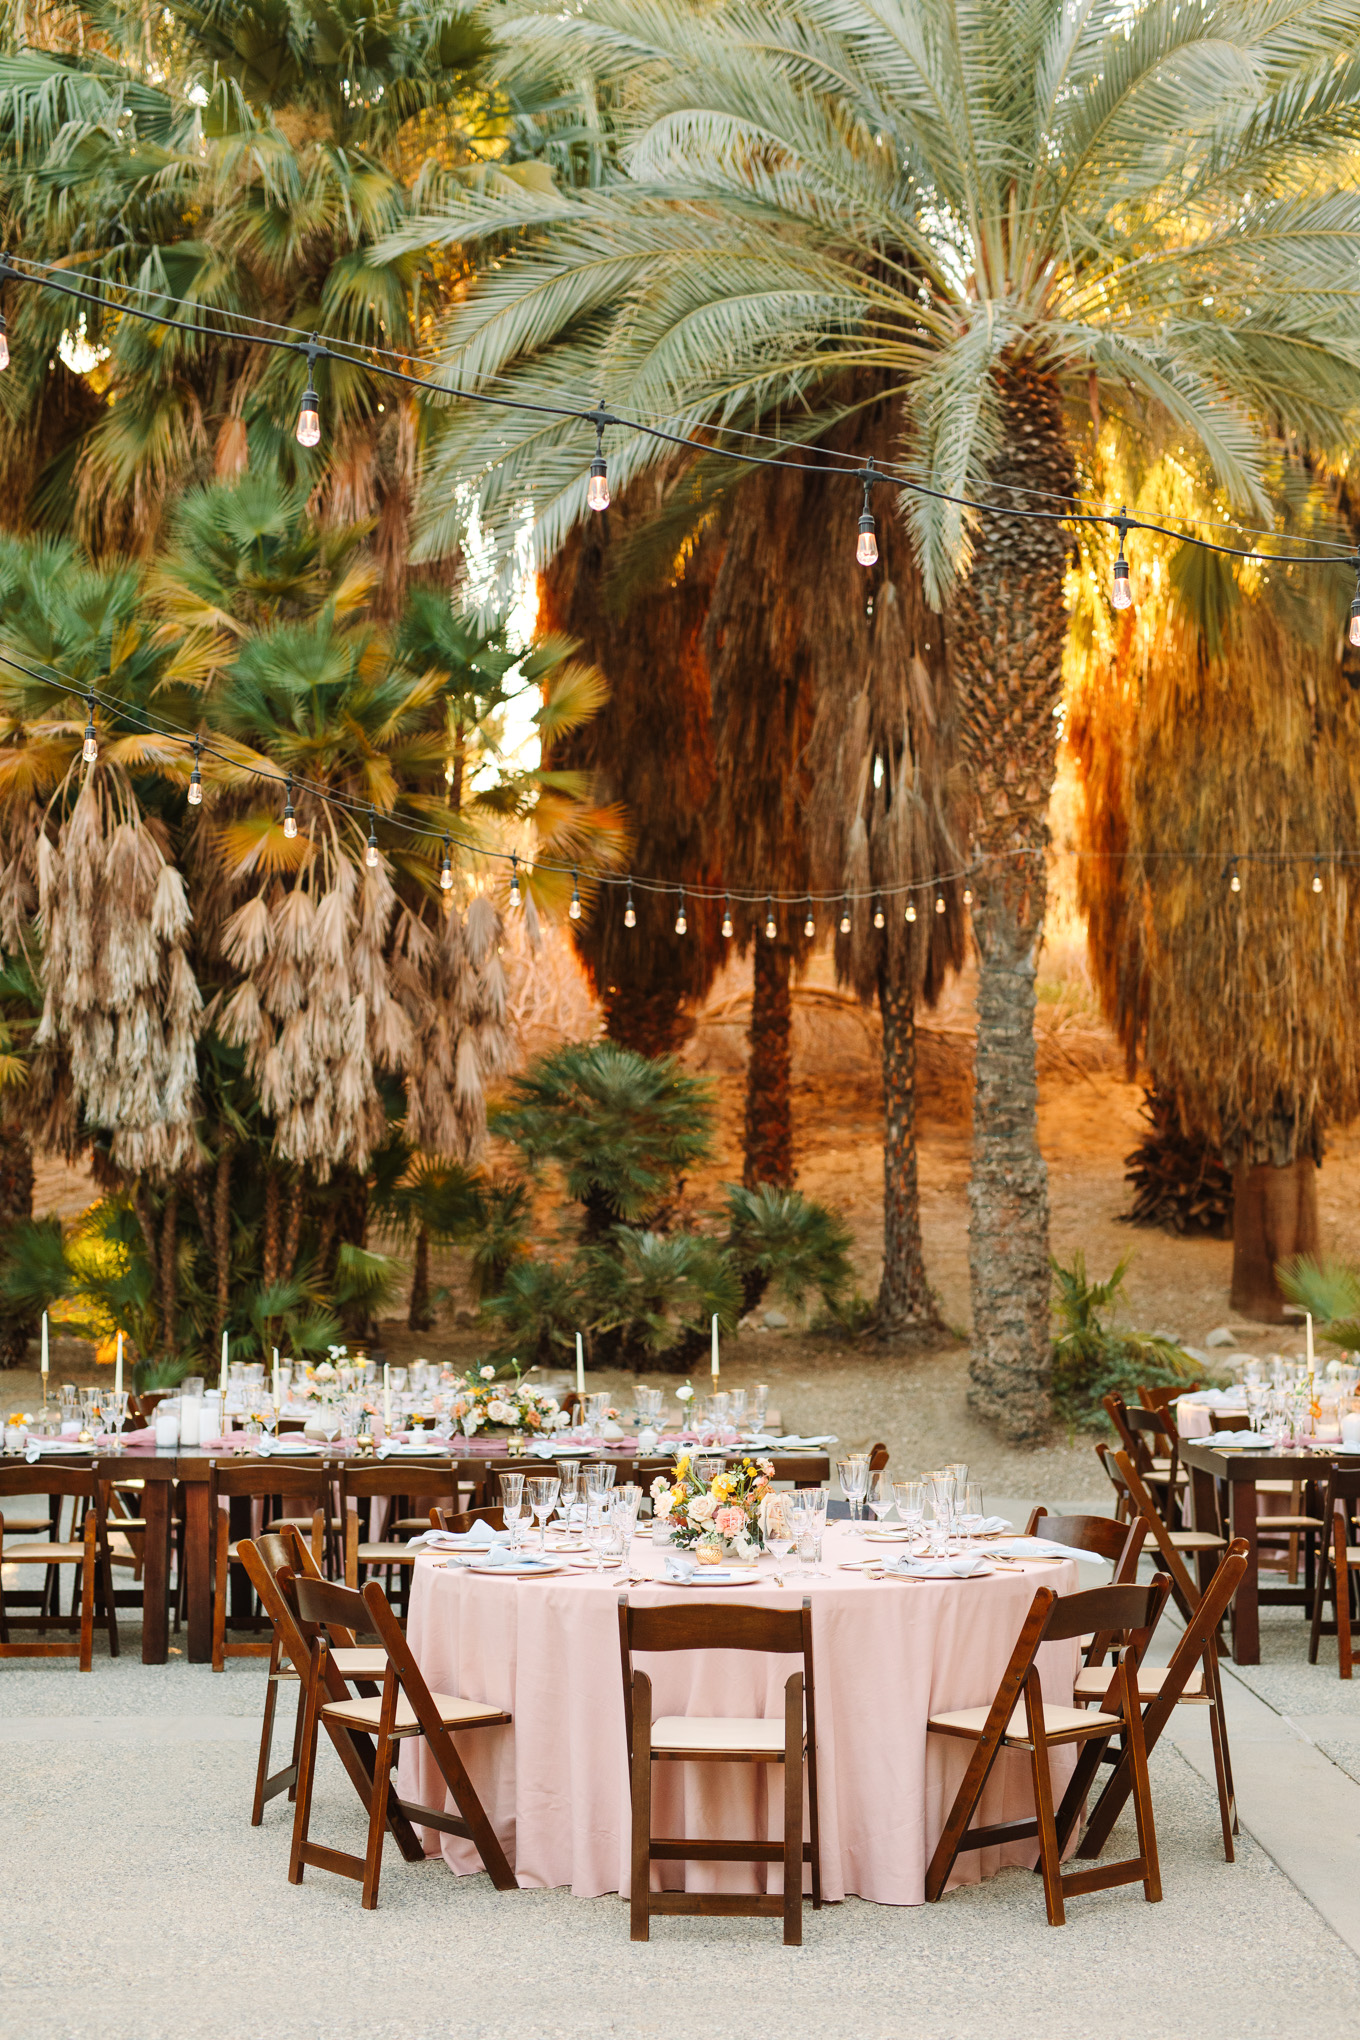 Wedding reception at Living Desert Zoo | Best Southern California Garden Wedding Venues | Colorful and elevated wedding photography for fun-loving couples | #gardenvenue #weddingvenue #socalweddingvenue #bouquetideas #uniquebouquet   Source: Mary Costa Photography | Los Angeles